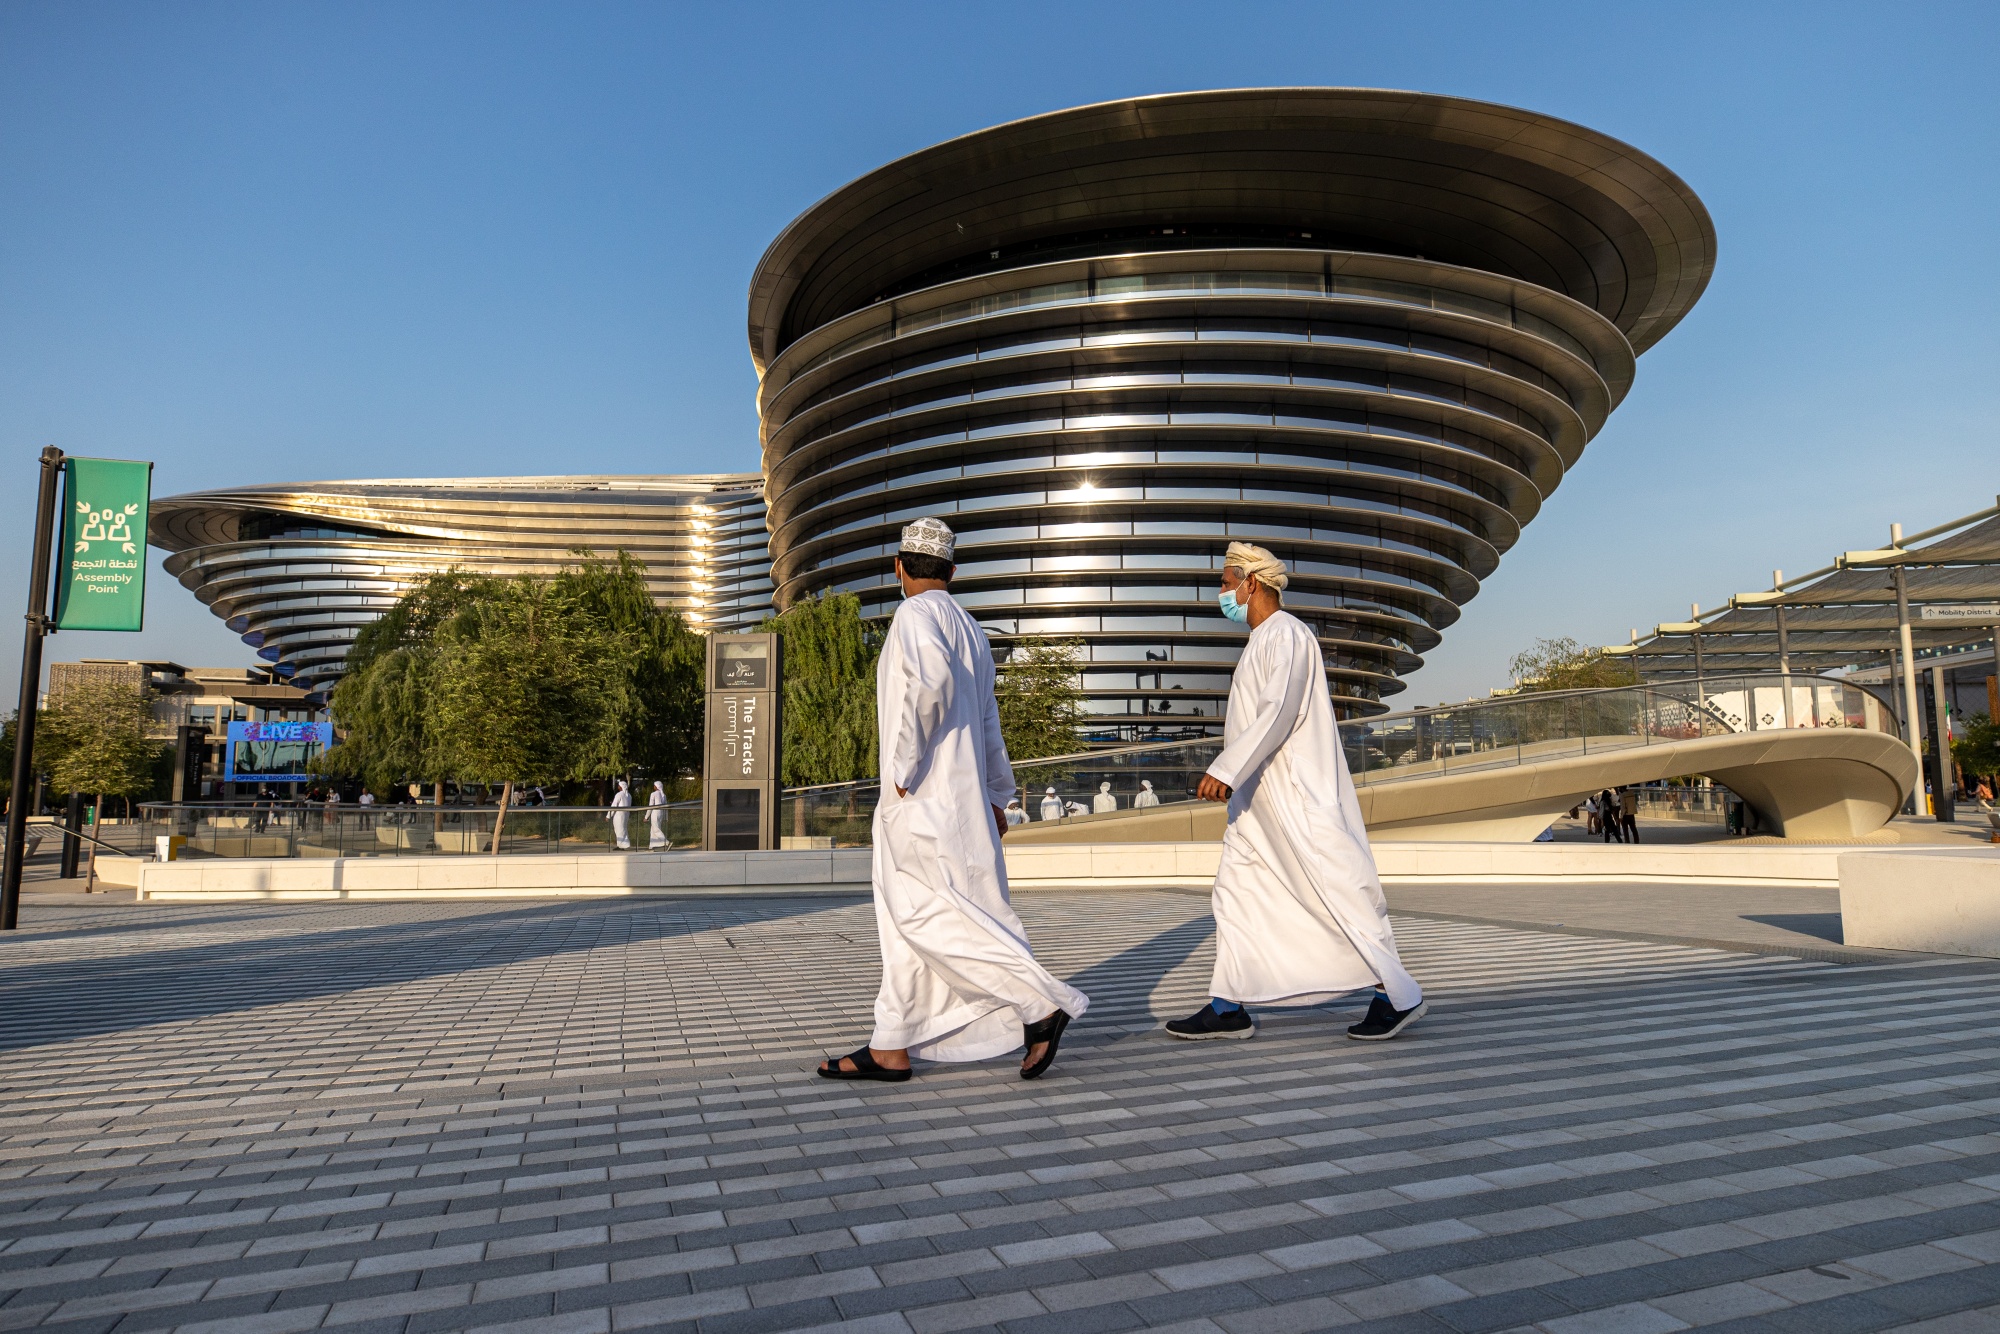 Dubai's Expo Spurs Tourism, Boosting UAE Business Activity - Bloomberg